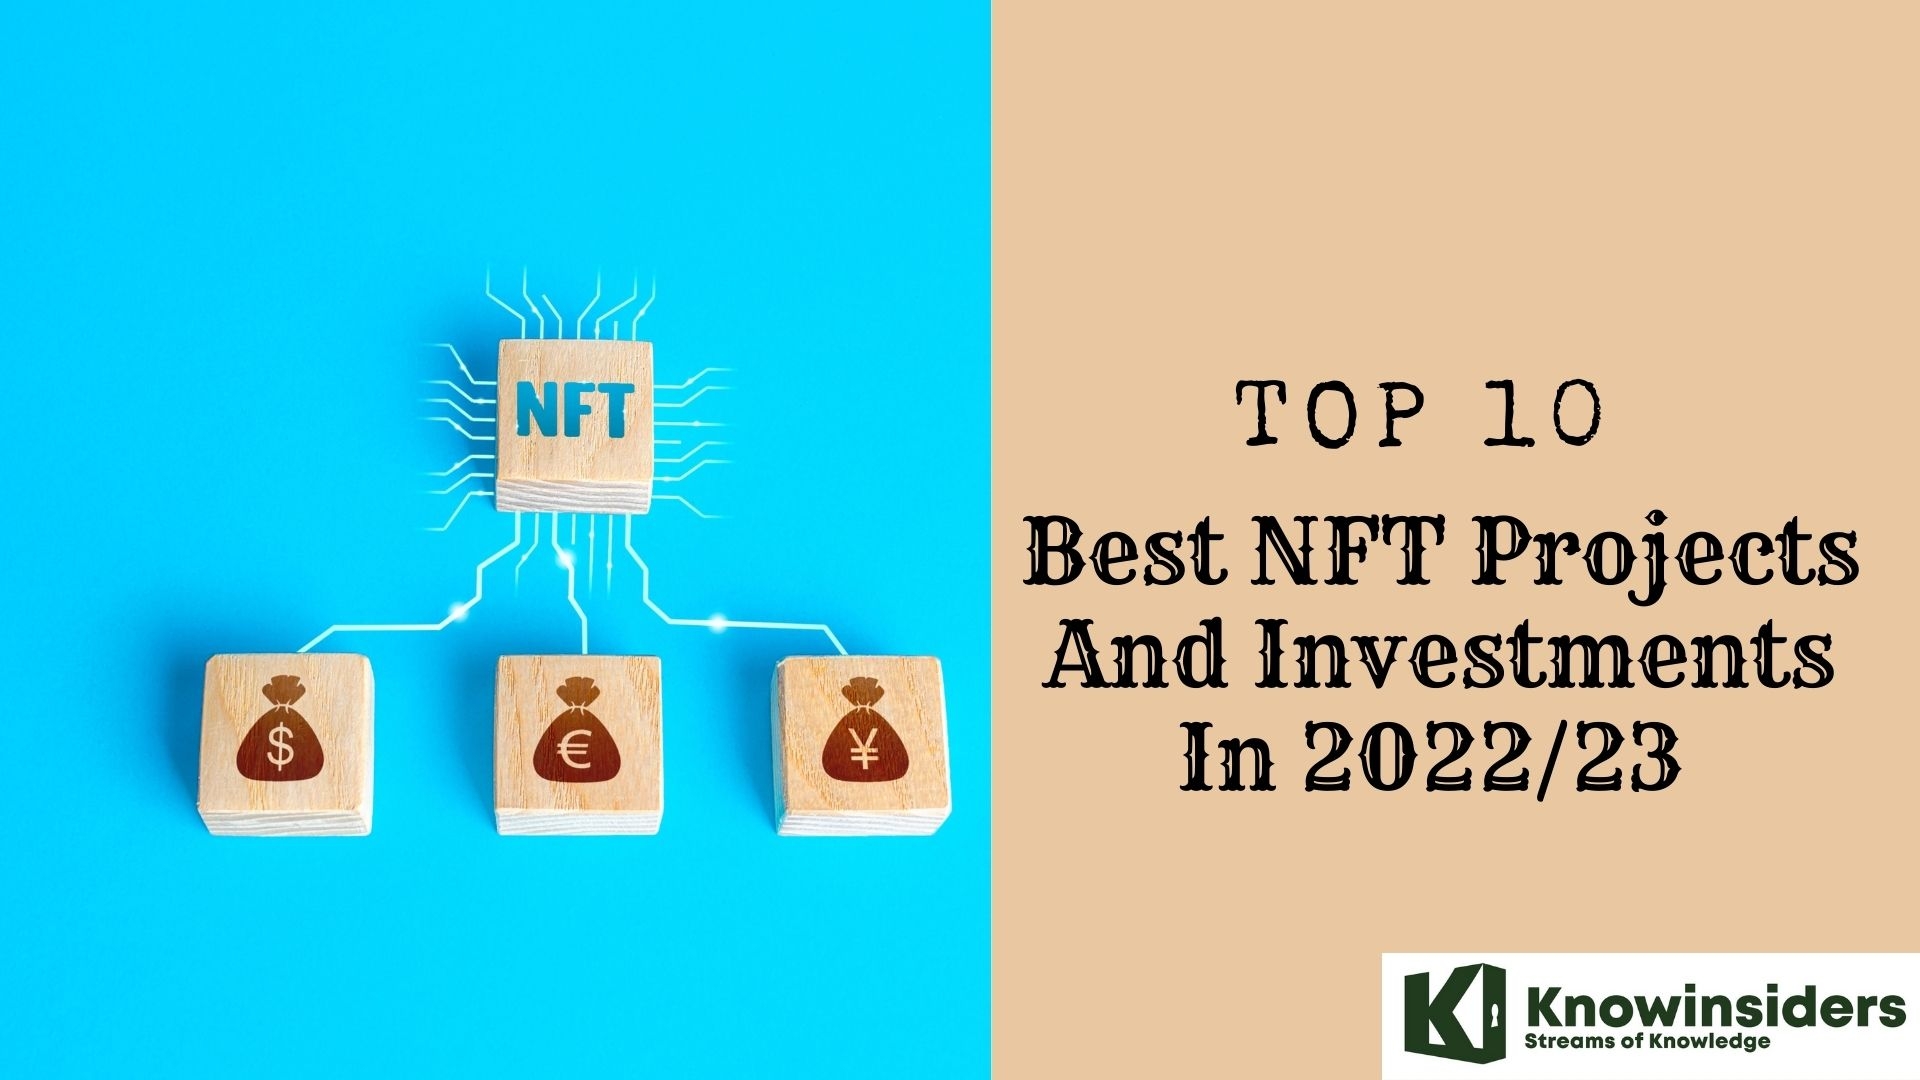 Top 10 Best NFT Projects And Investments In 2022/23 